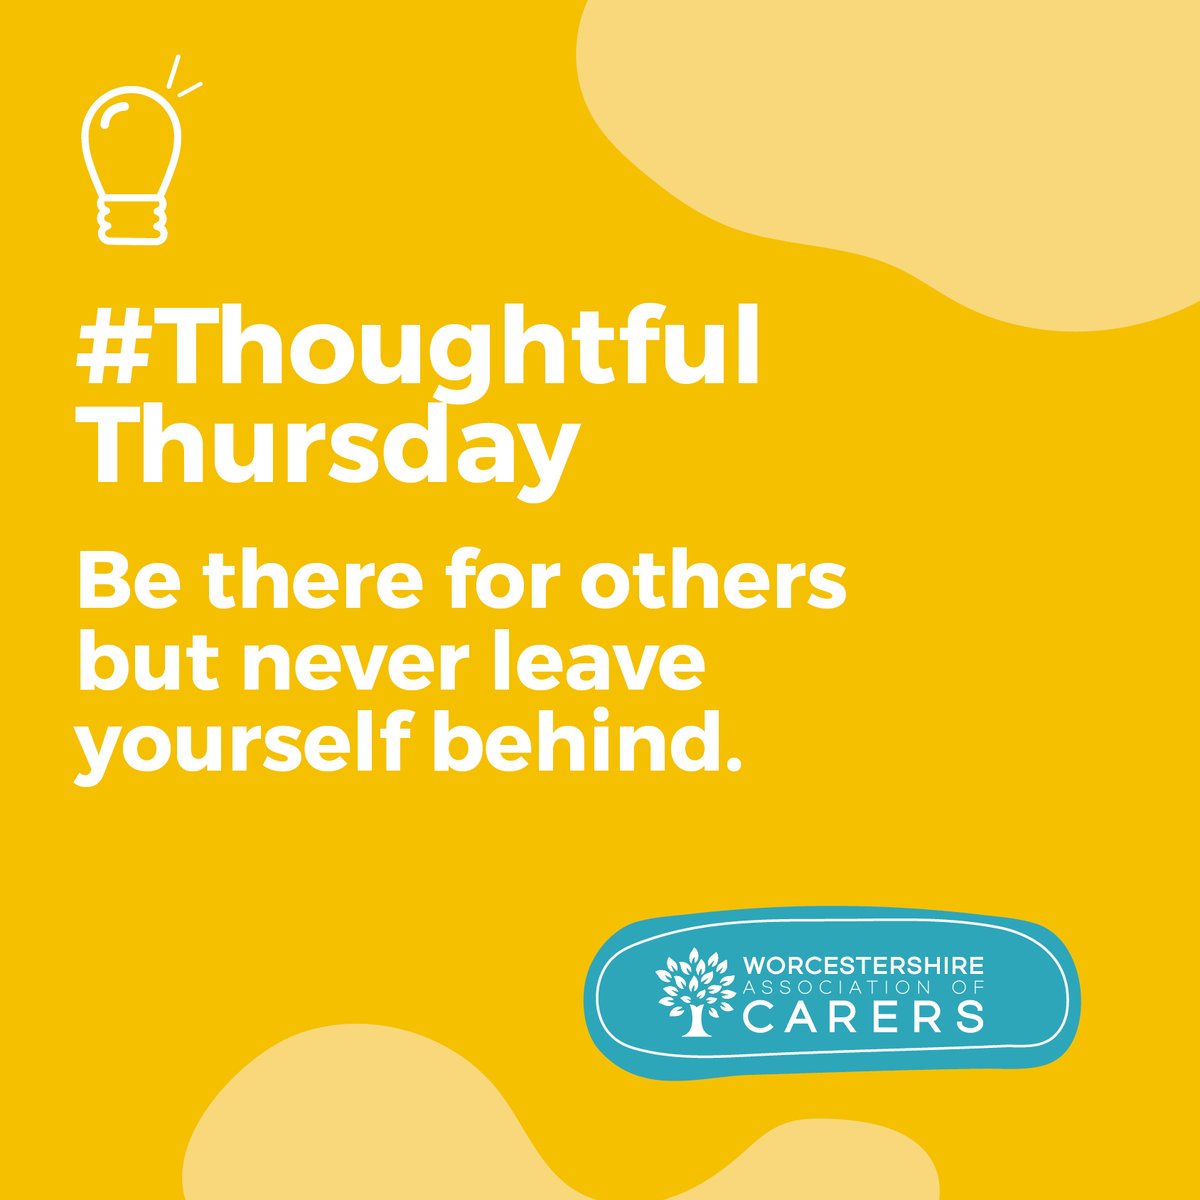 A reminder that whilst caring and supporting others, we must remember to not lose sight of our own needs.💛 #unpaidcarers #carerwellbeing #carersupport #worcestershire #mentalhealth #mentalwellbeing #selfcare #wellbeing #thoughtfulthursday #thursdayvibes #thursdaythoughts